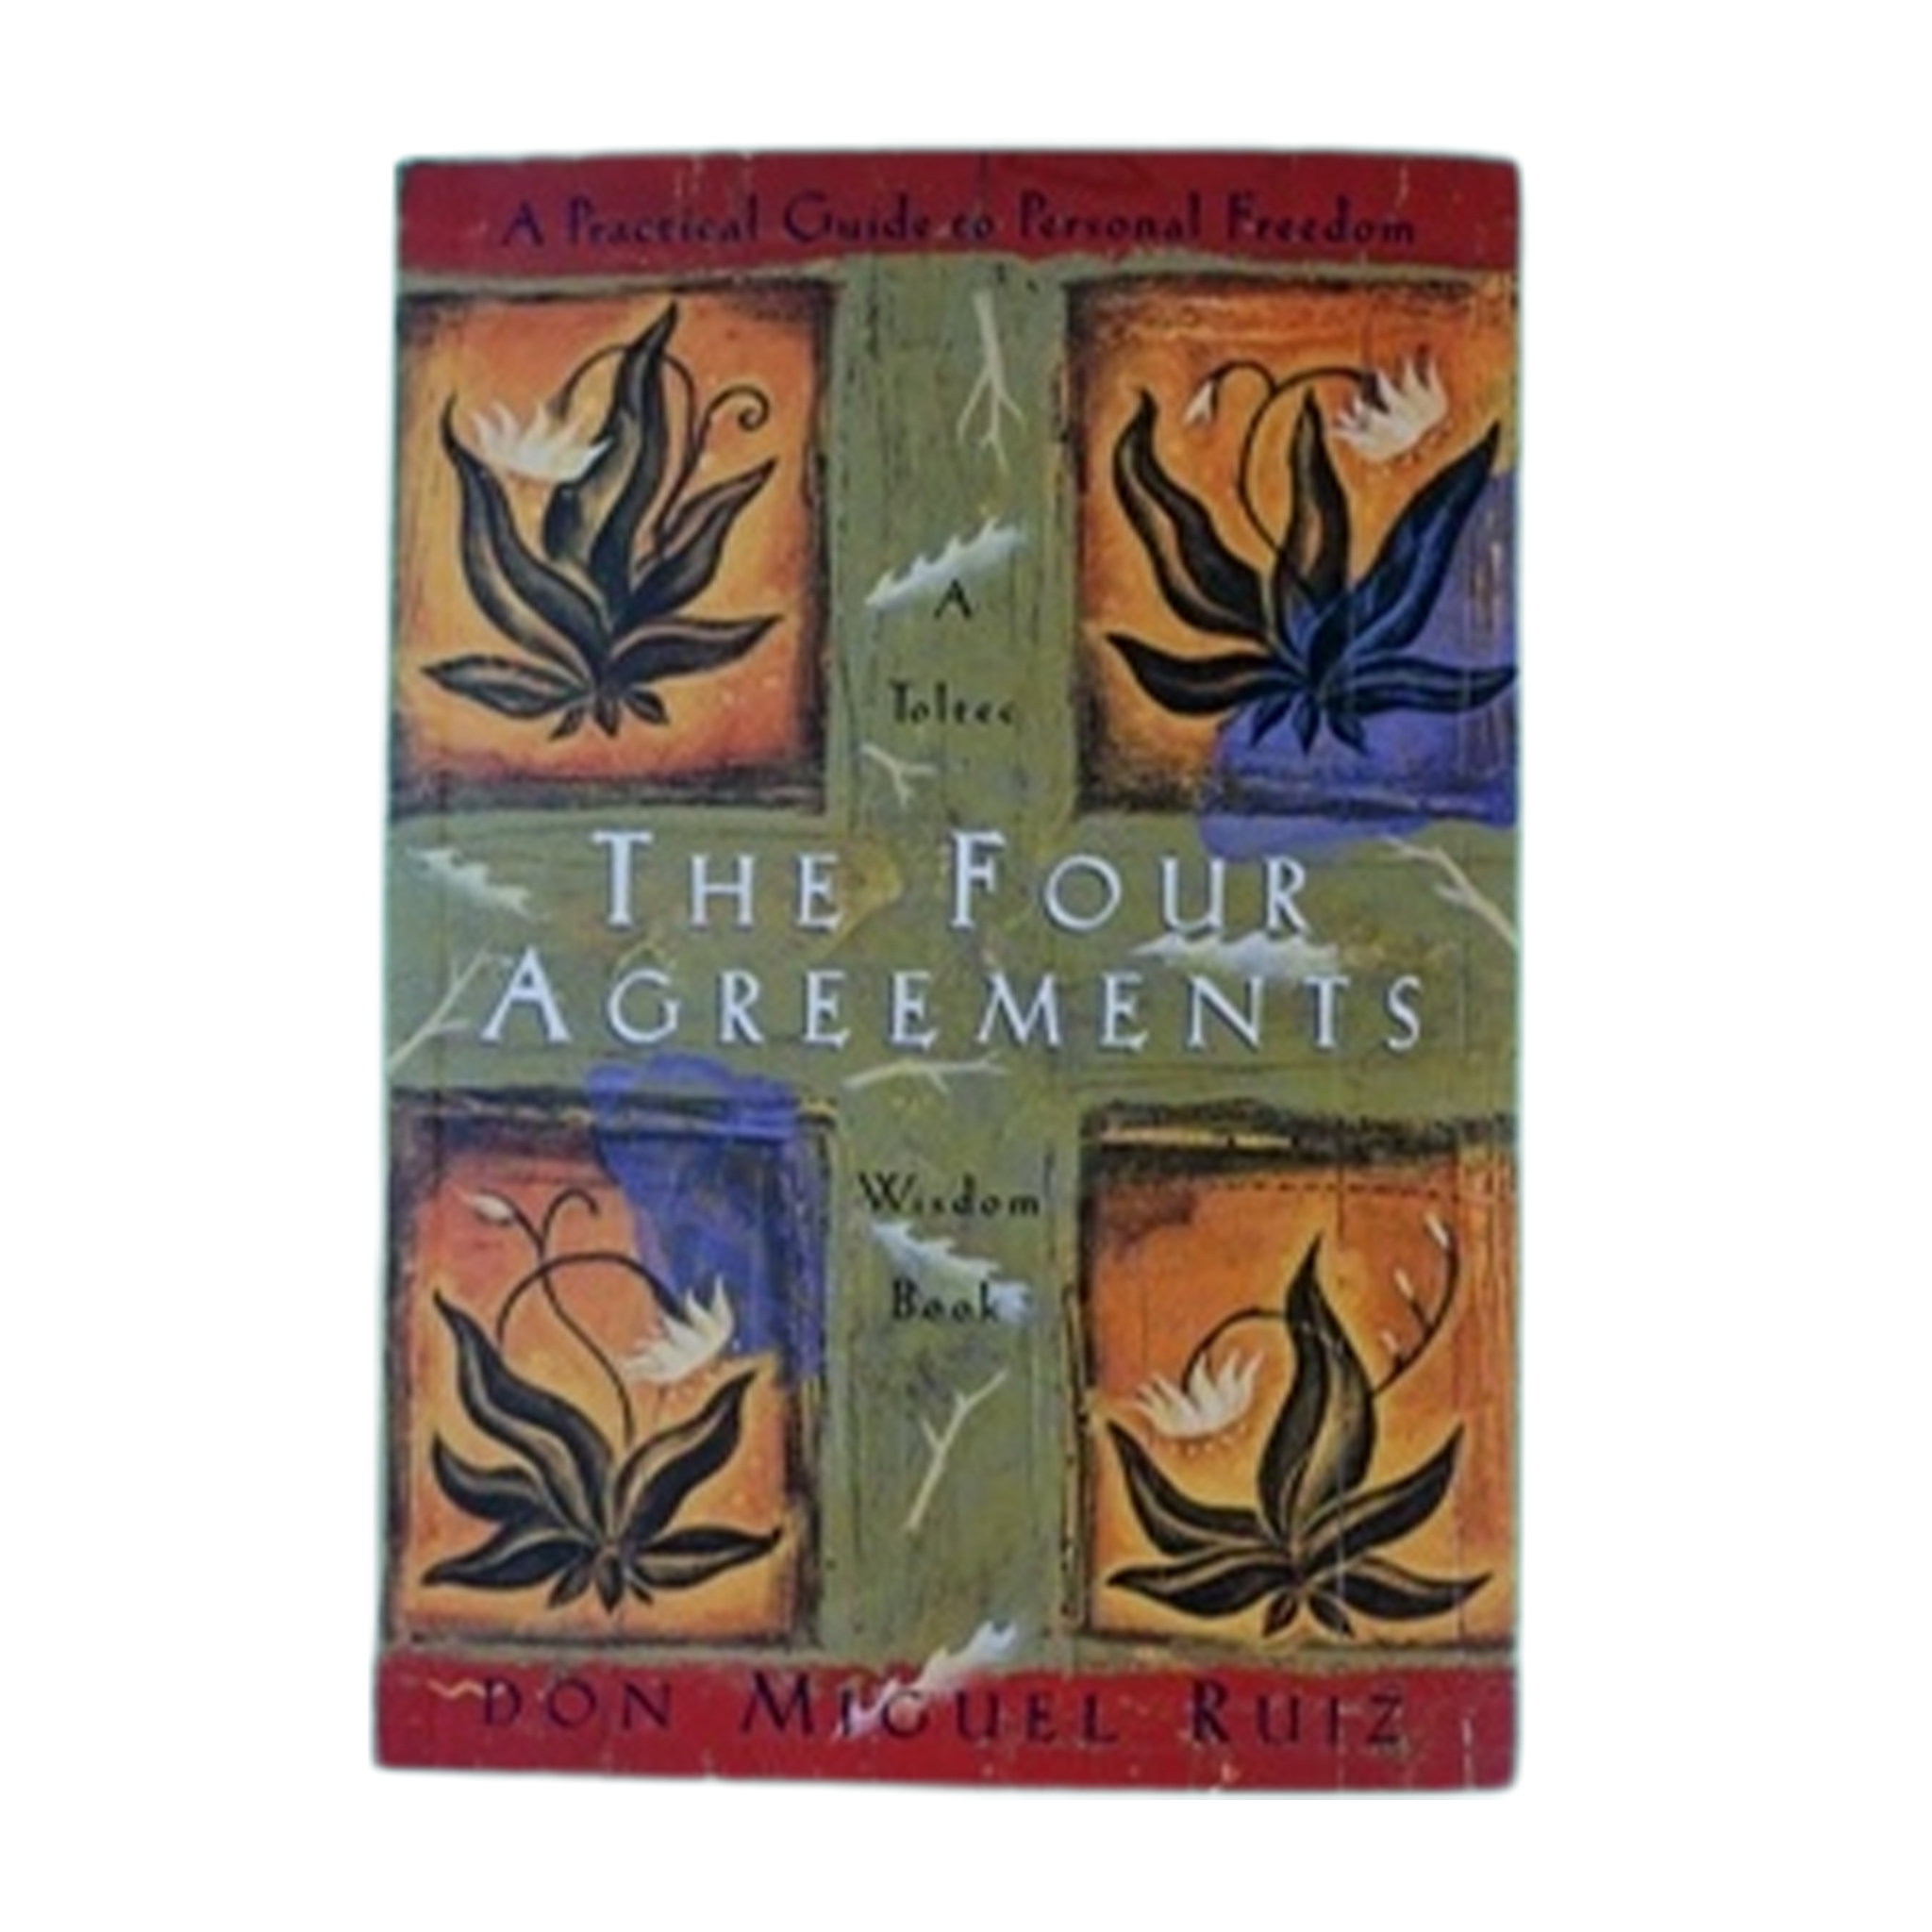 The Four Agreements  by Don Miguel Ruiz